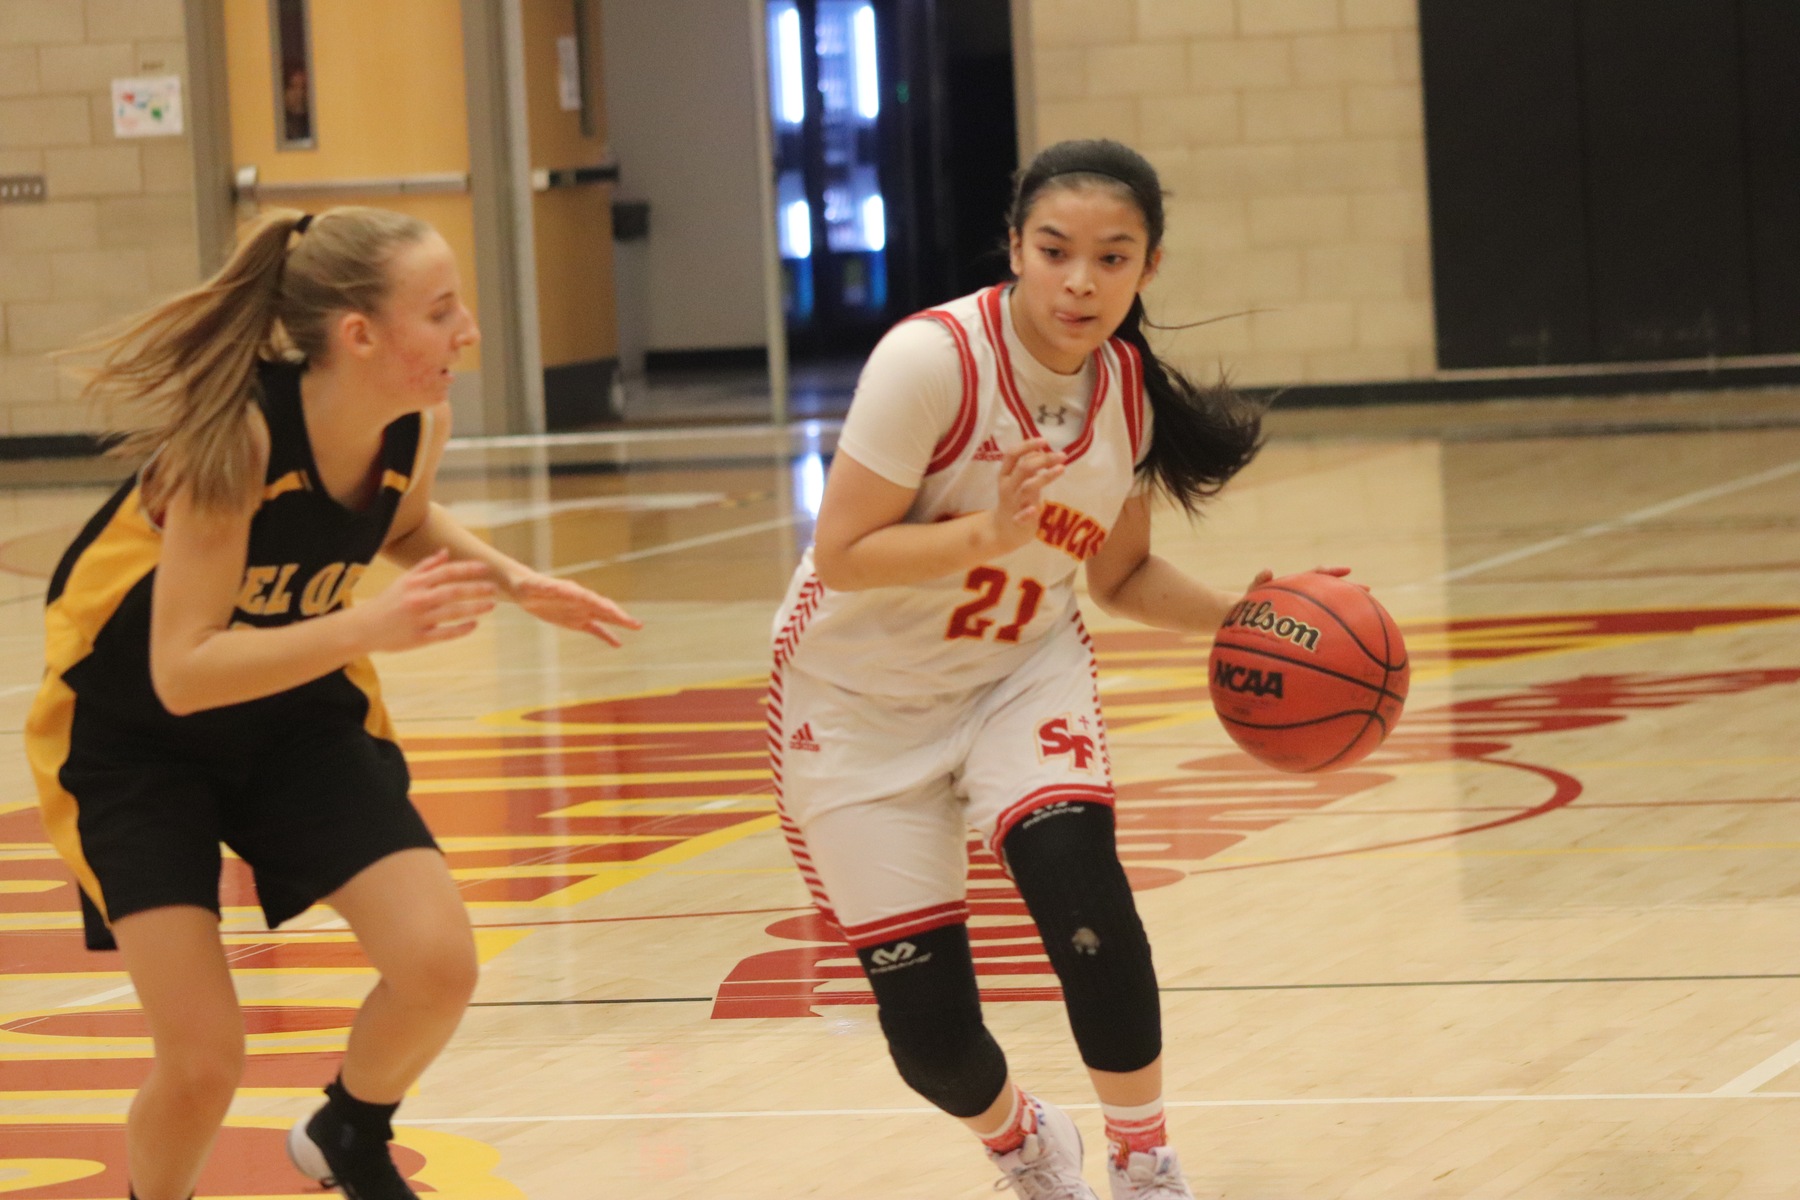 Baccay Leads JV Basketball to Victory in Season Finale